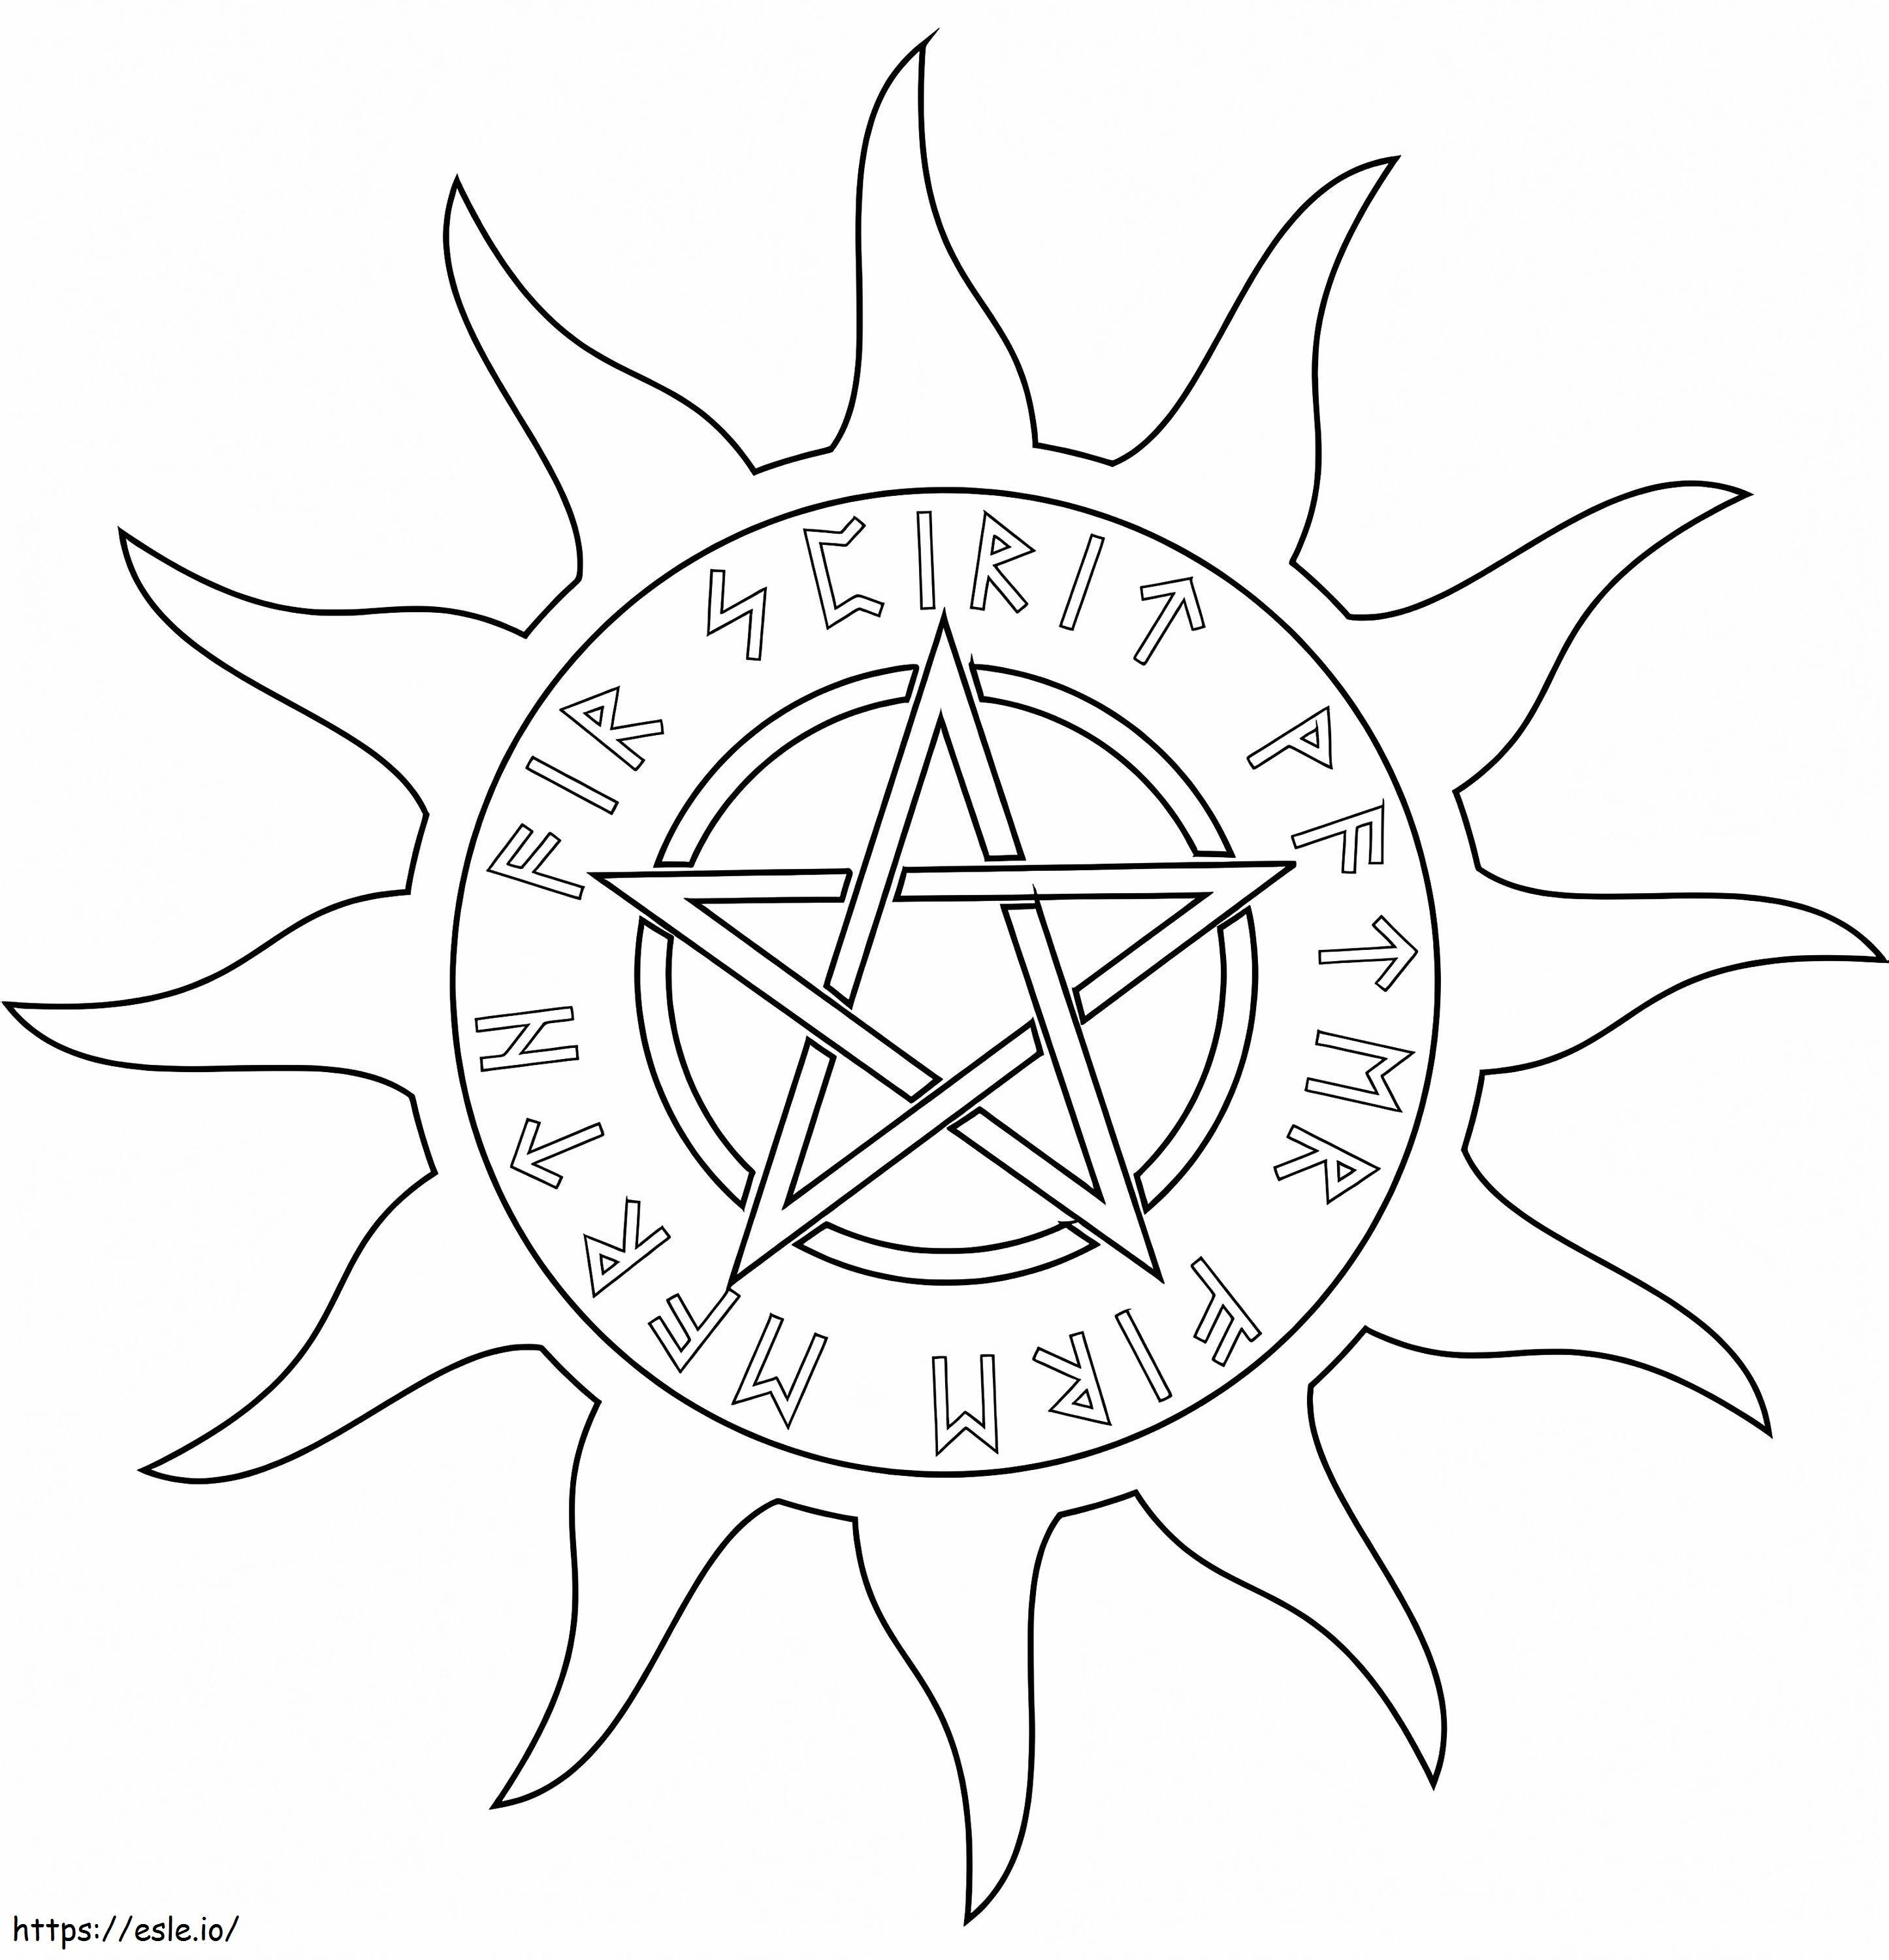 Wiccan Pentagram With Five Elements coloring page